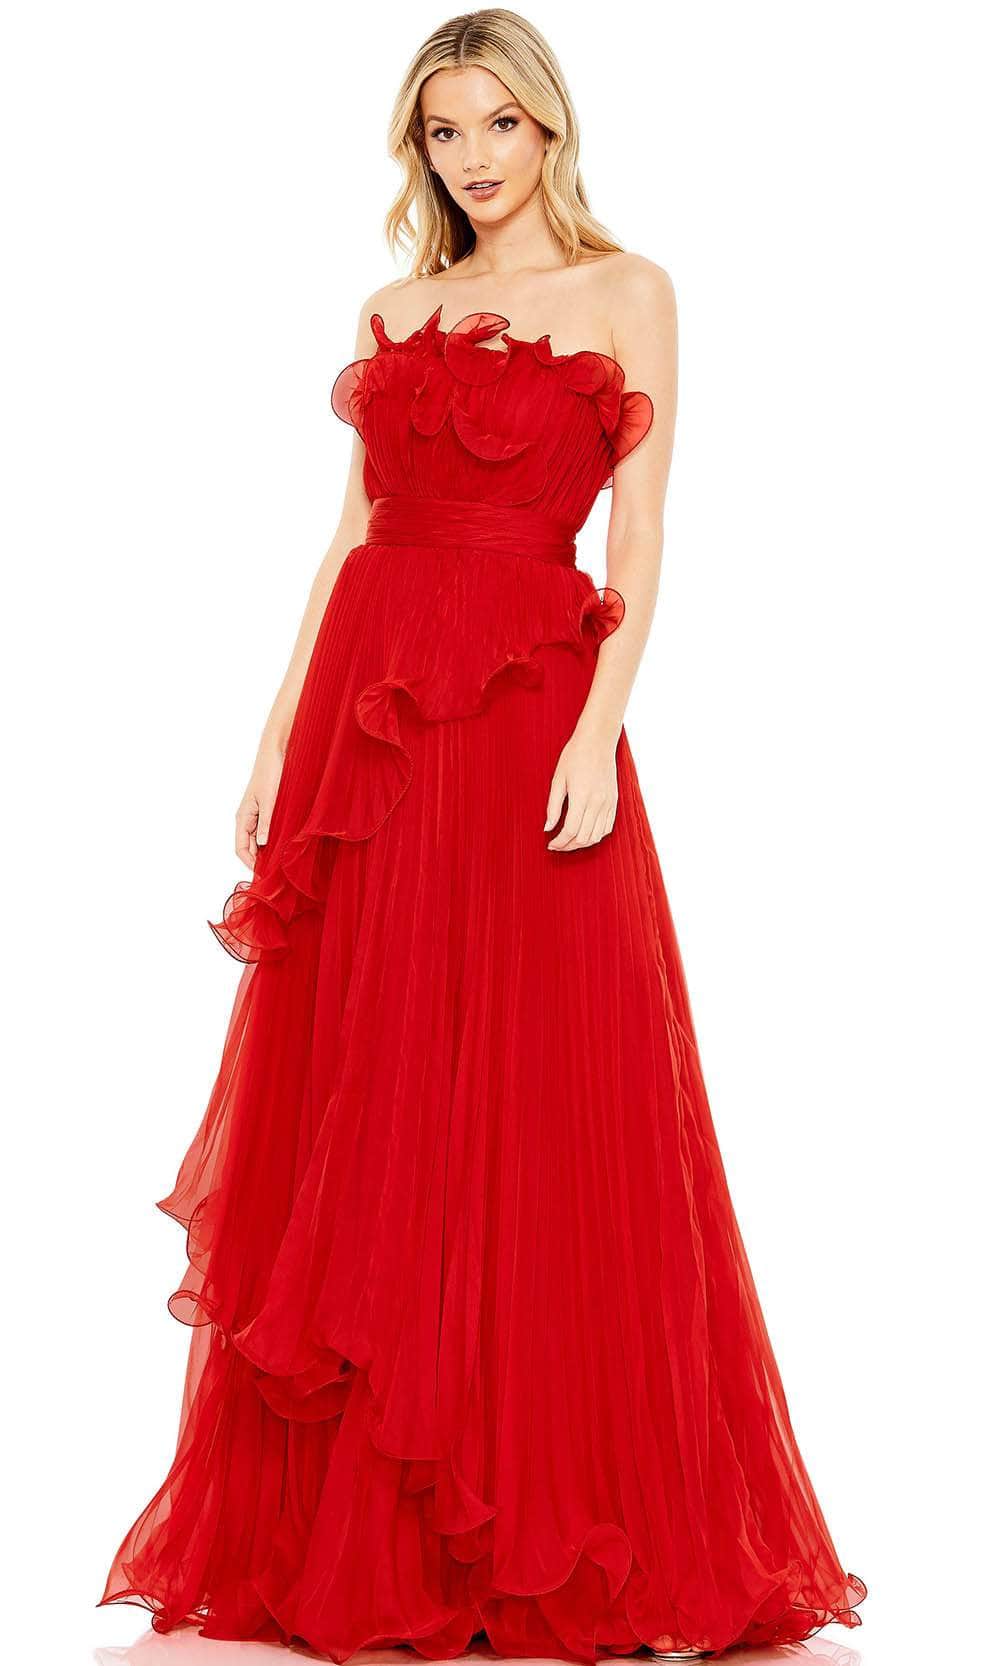 Image of Mac Duggal 49537 - Ruffled Strapless A-Line Prom Gown